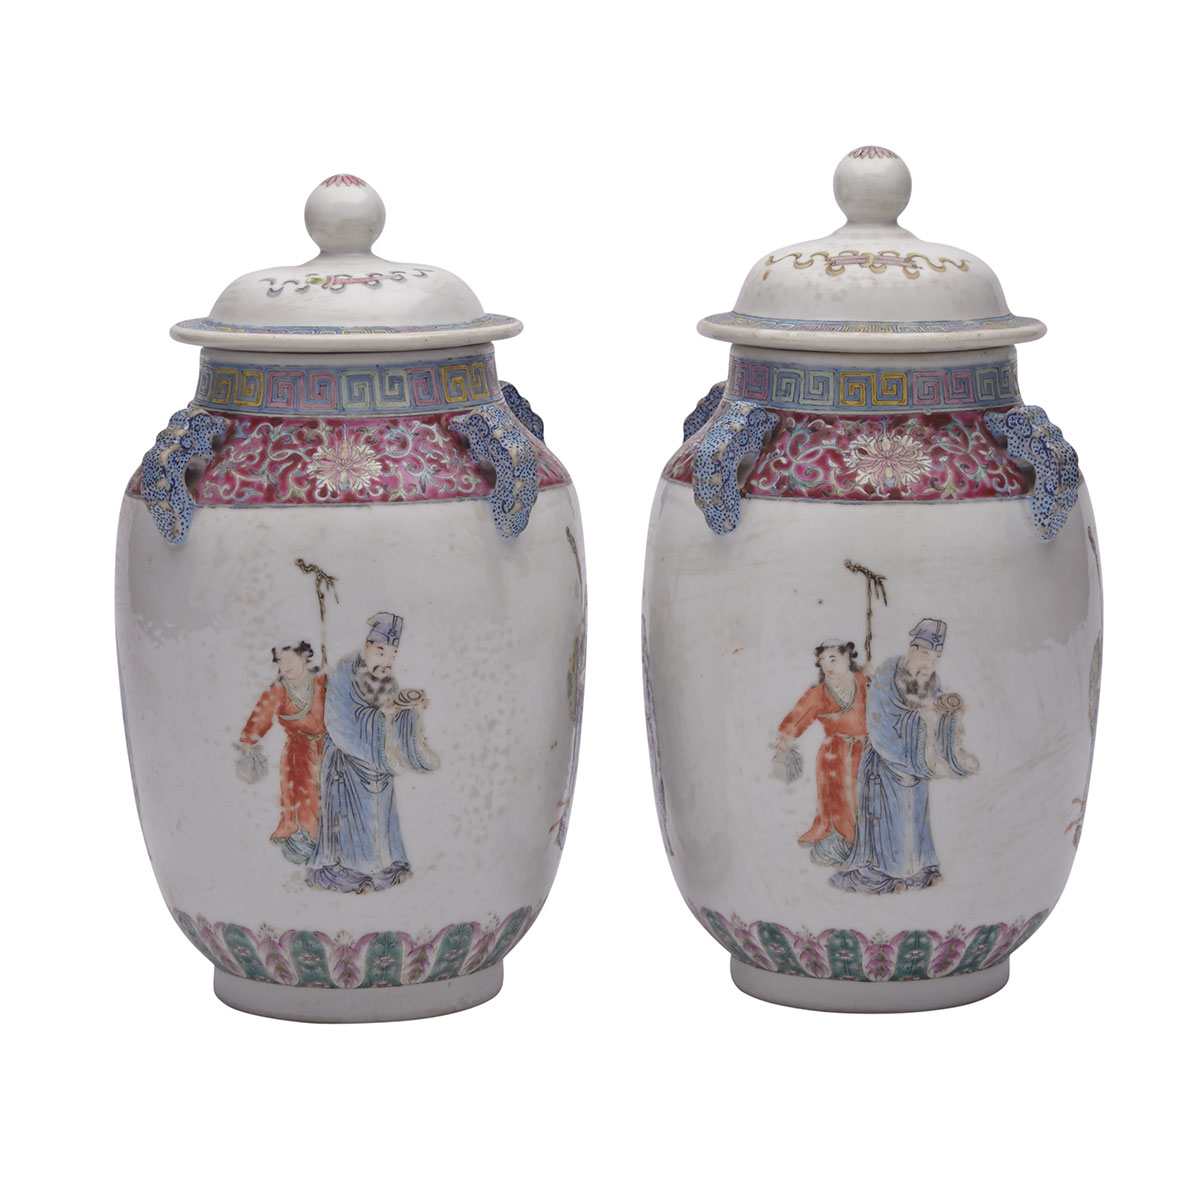 Pair of Famille Rose Jars and Covers, Qianlong Mark, Republican Period